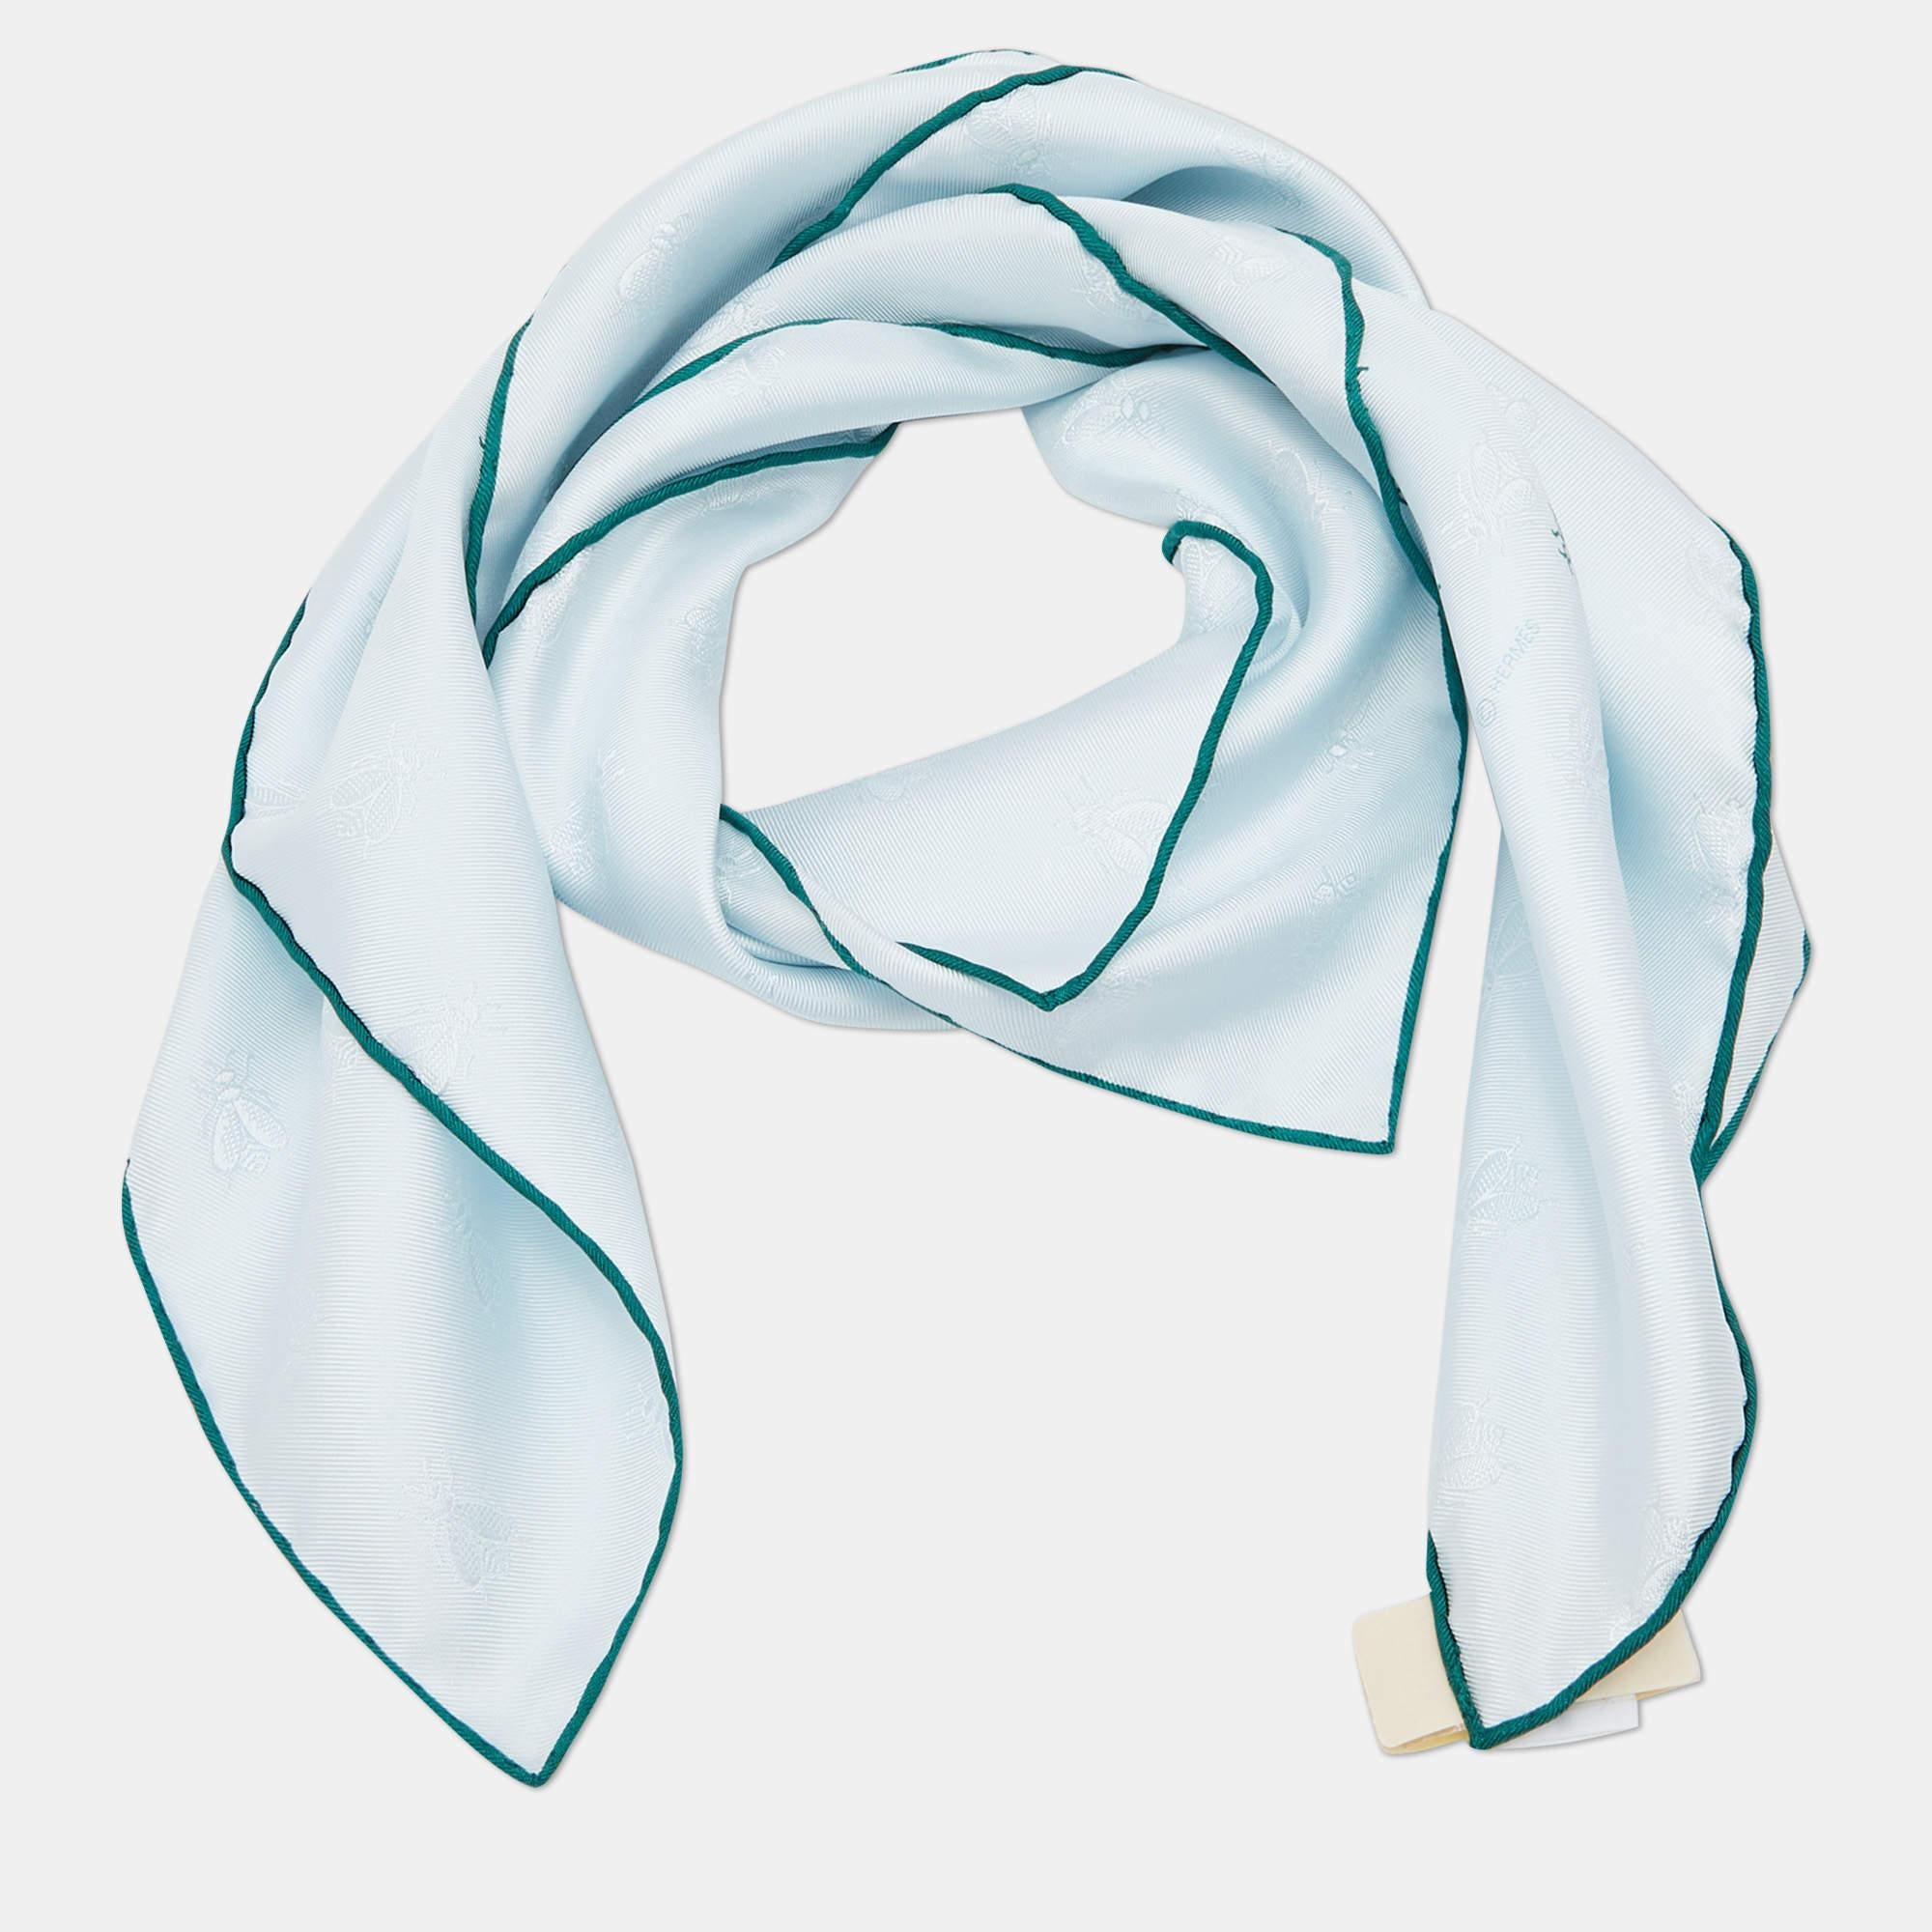 An essential Hermes accessory, the label's scarves are as iconic as any other creation from the brand and are collector's favorites. This rendition is carefully cut from luxurious silk and designed with an intricate print. There are endless ways to